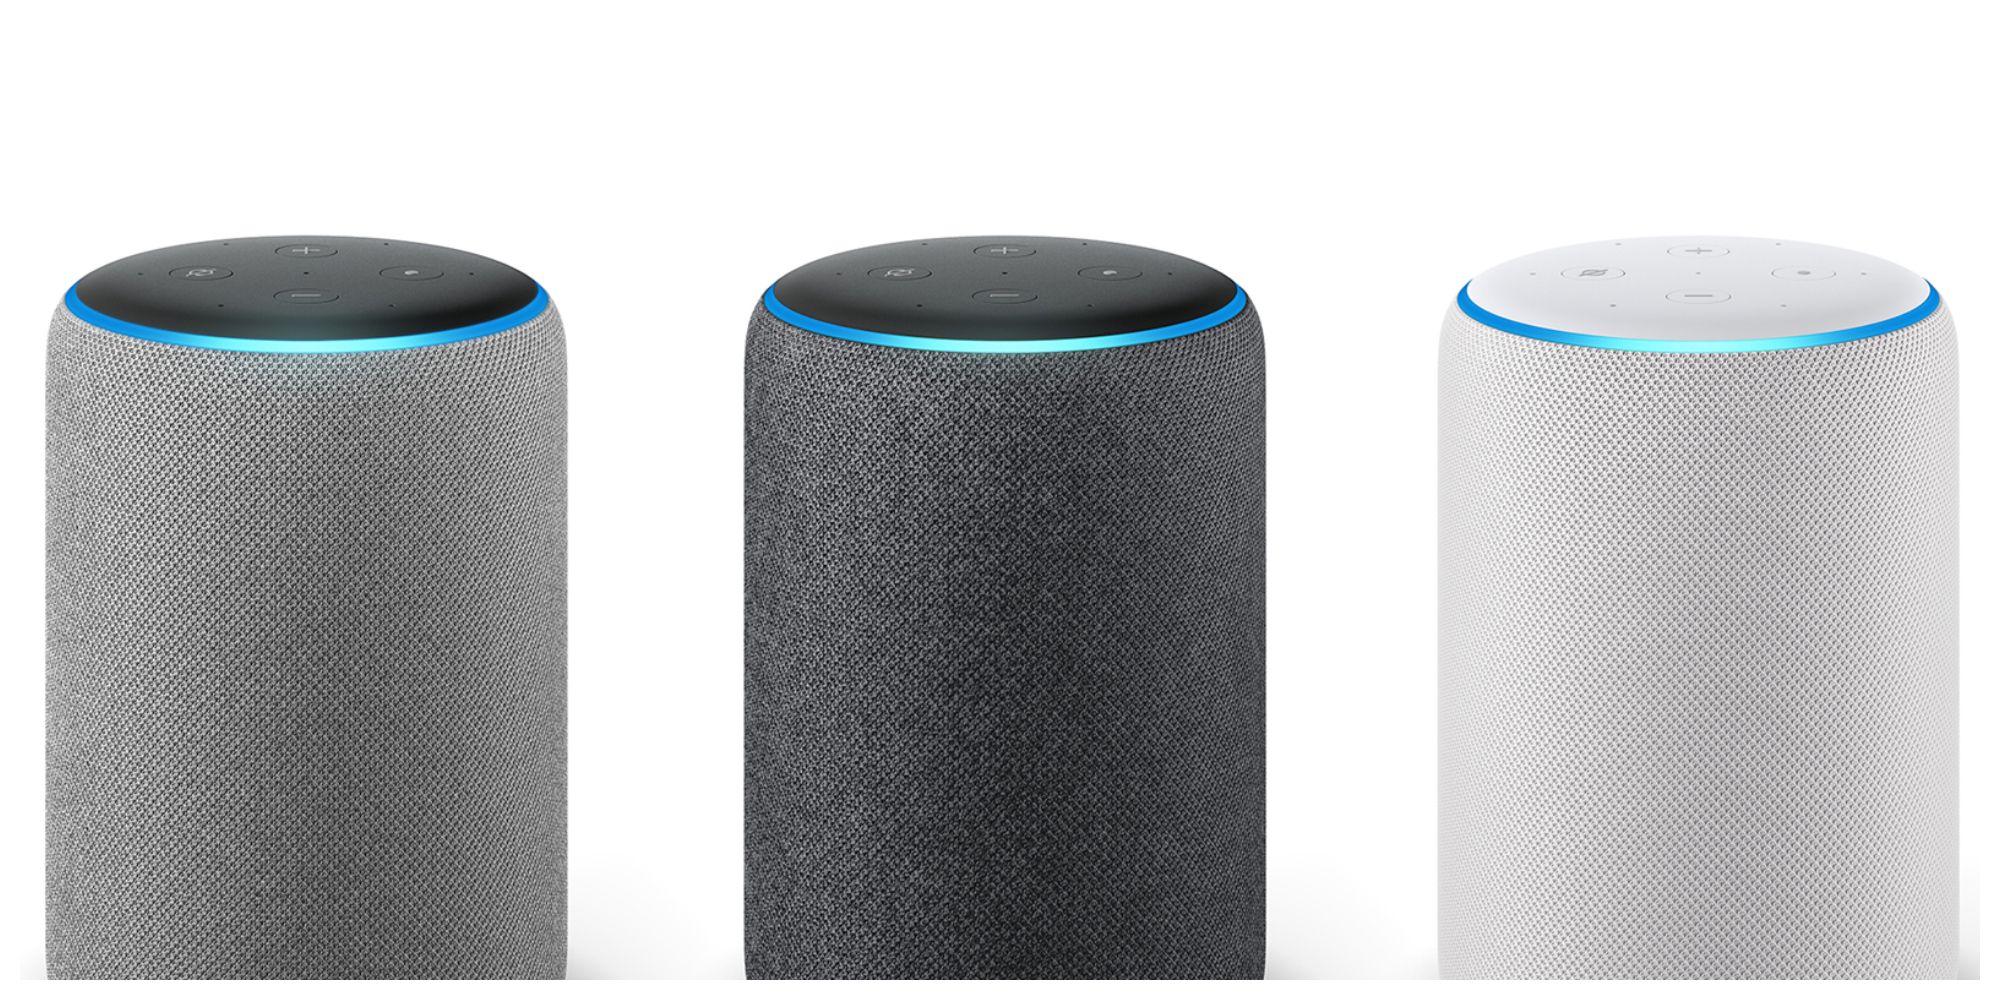 Alexa What The Different Light Colors Mean On An Amazon Echo Device